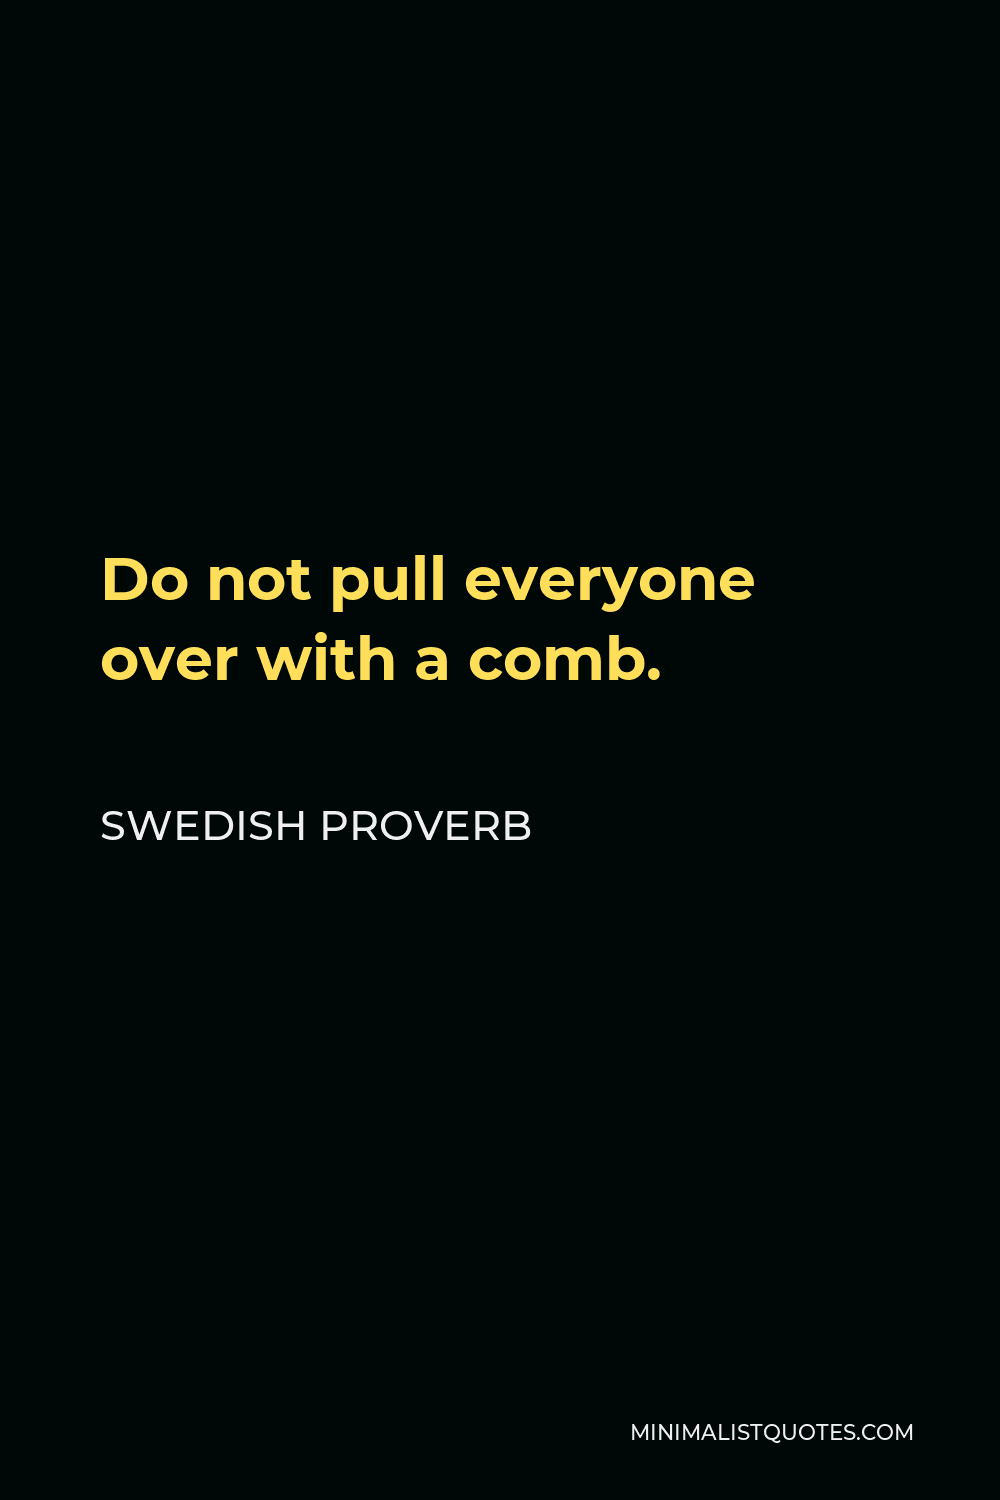 Swedish Proverb Quote - Do not pull everyone over with a comb.